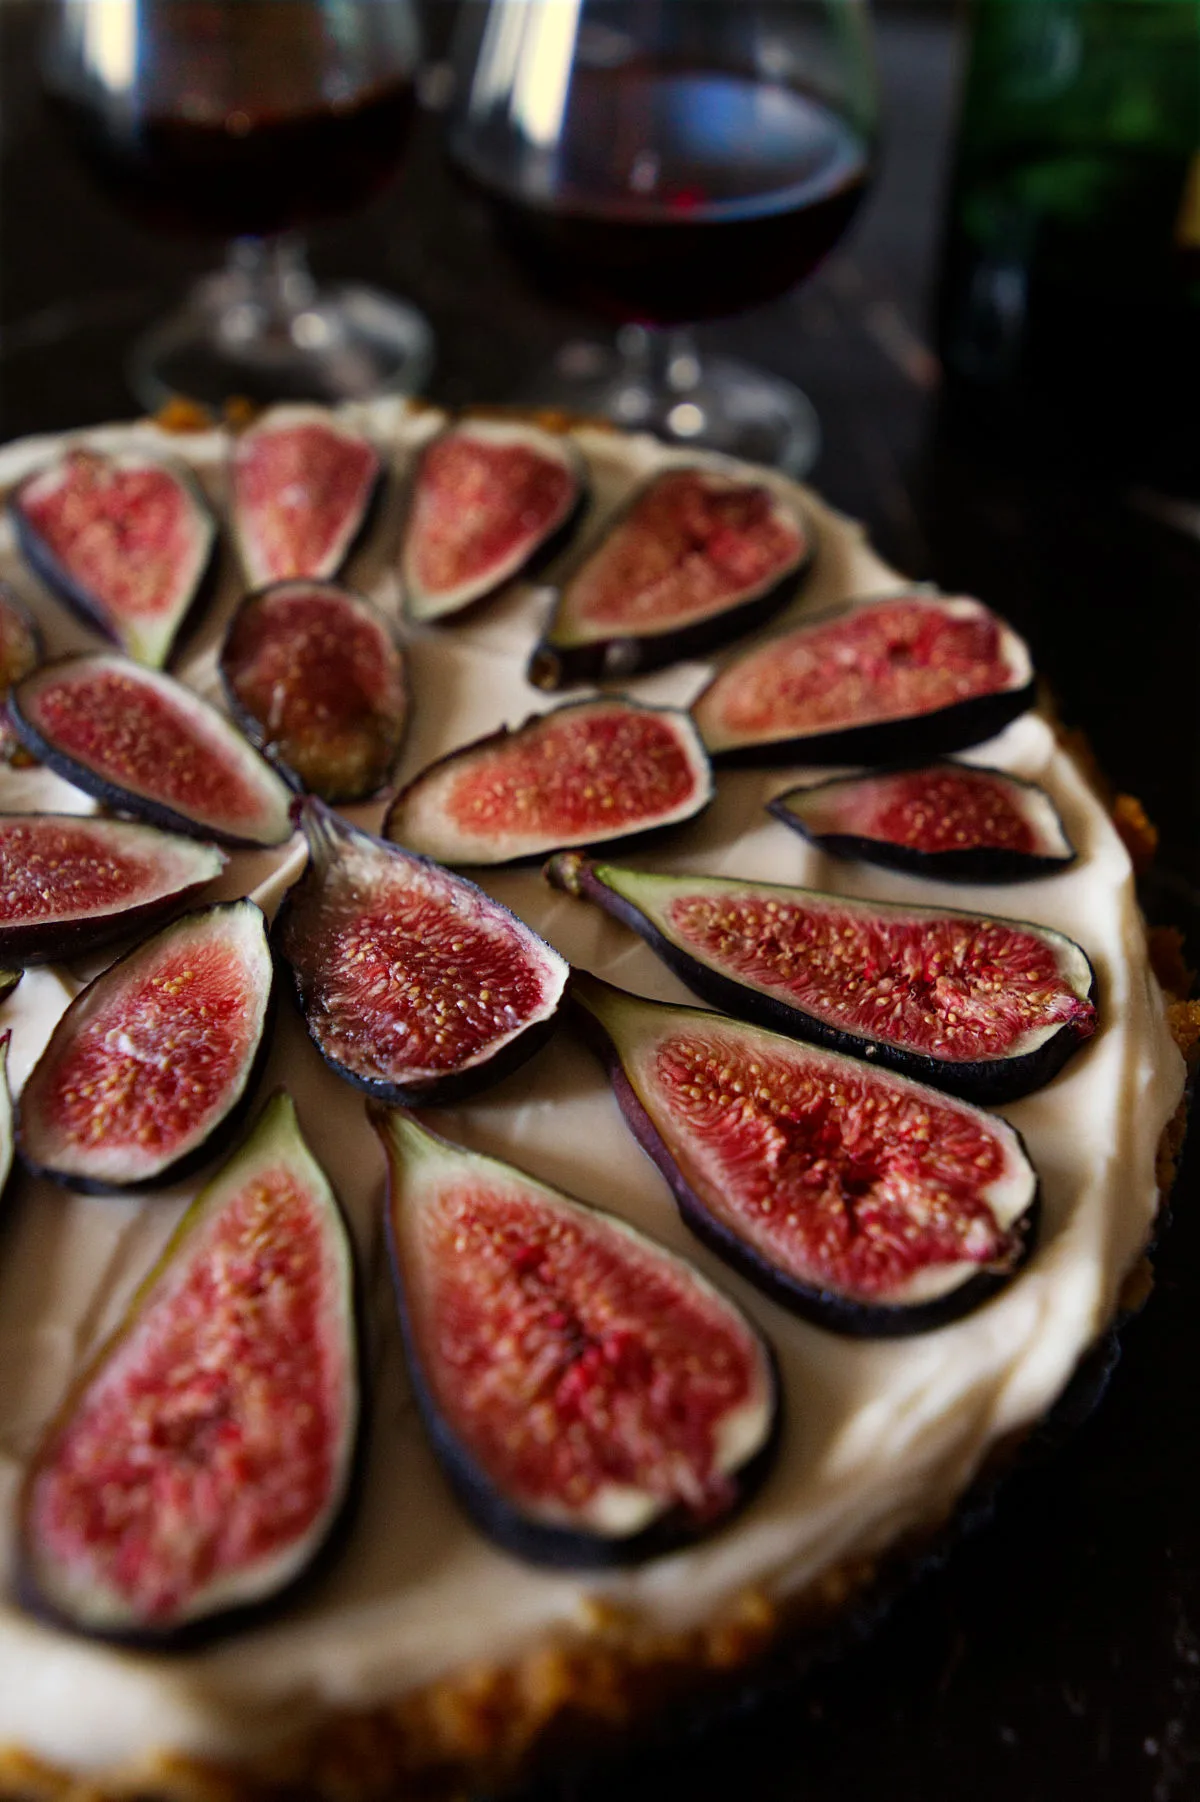 A no bake cheeseccake topped with slices of fresh figs.